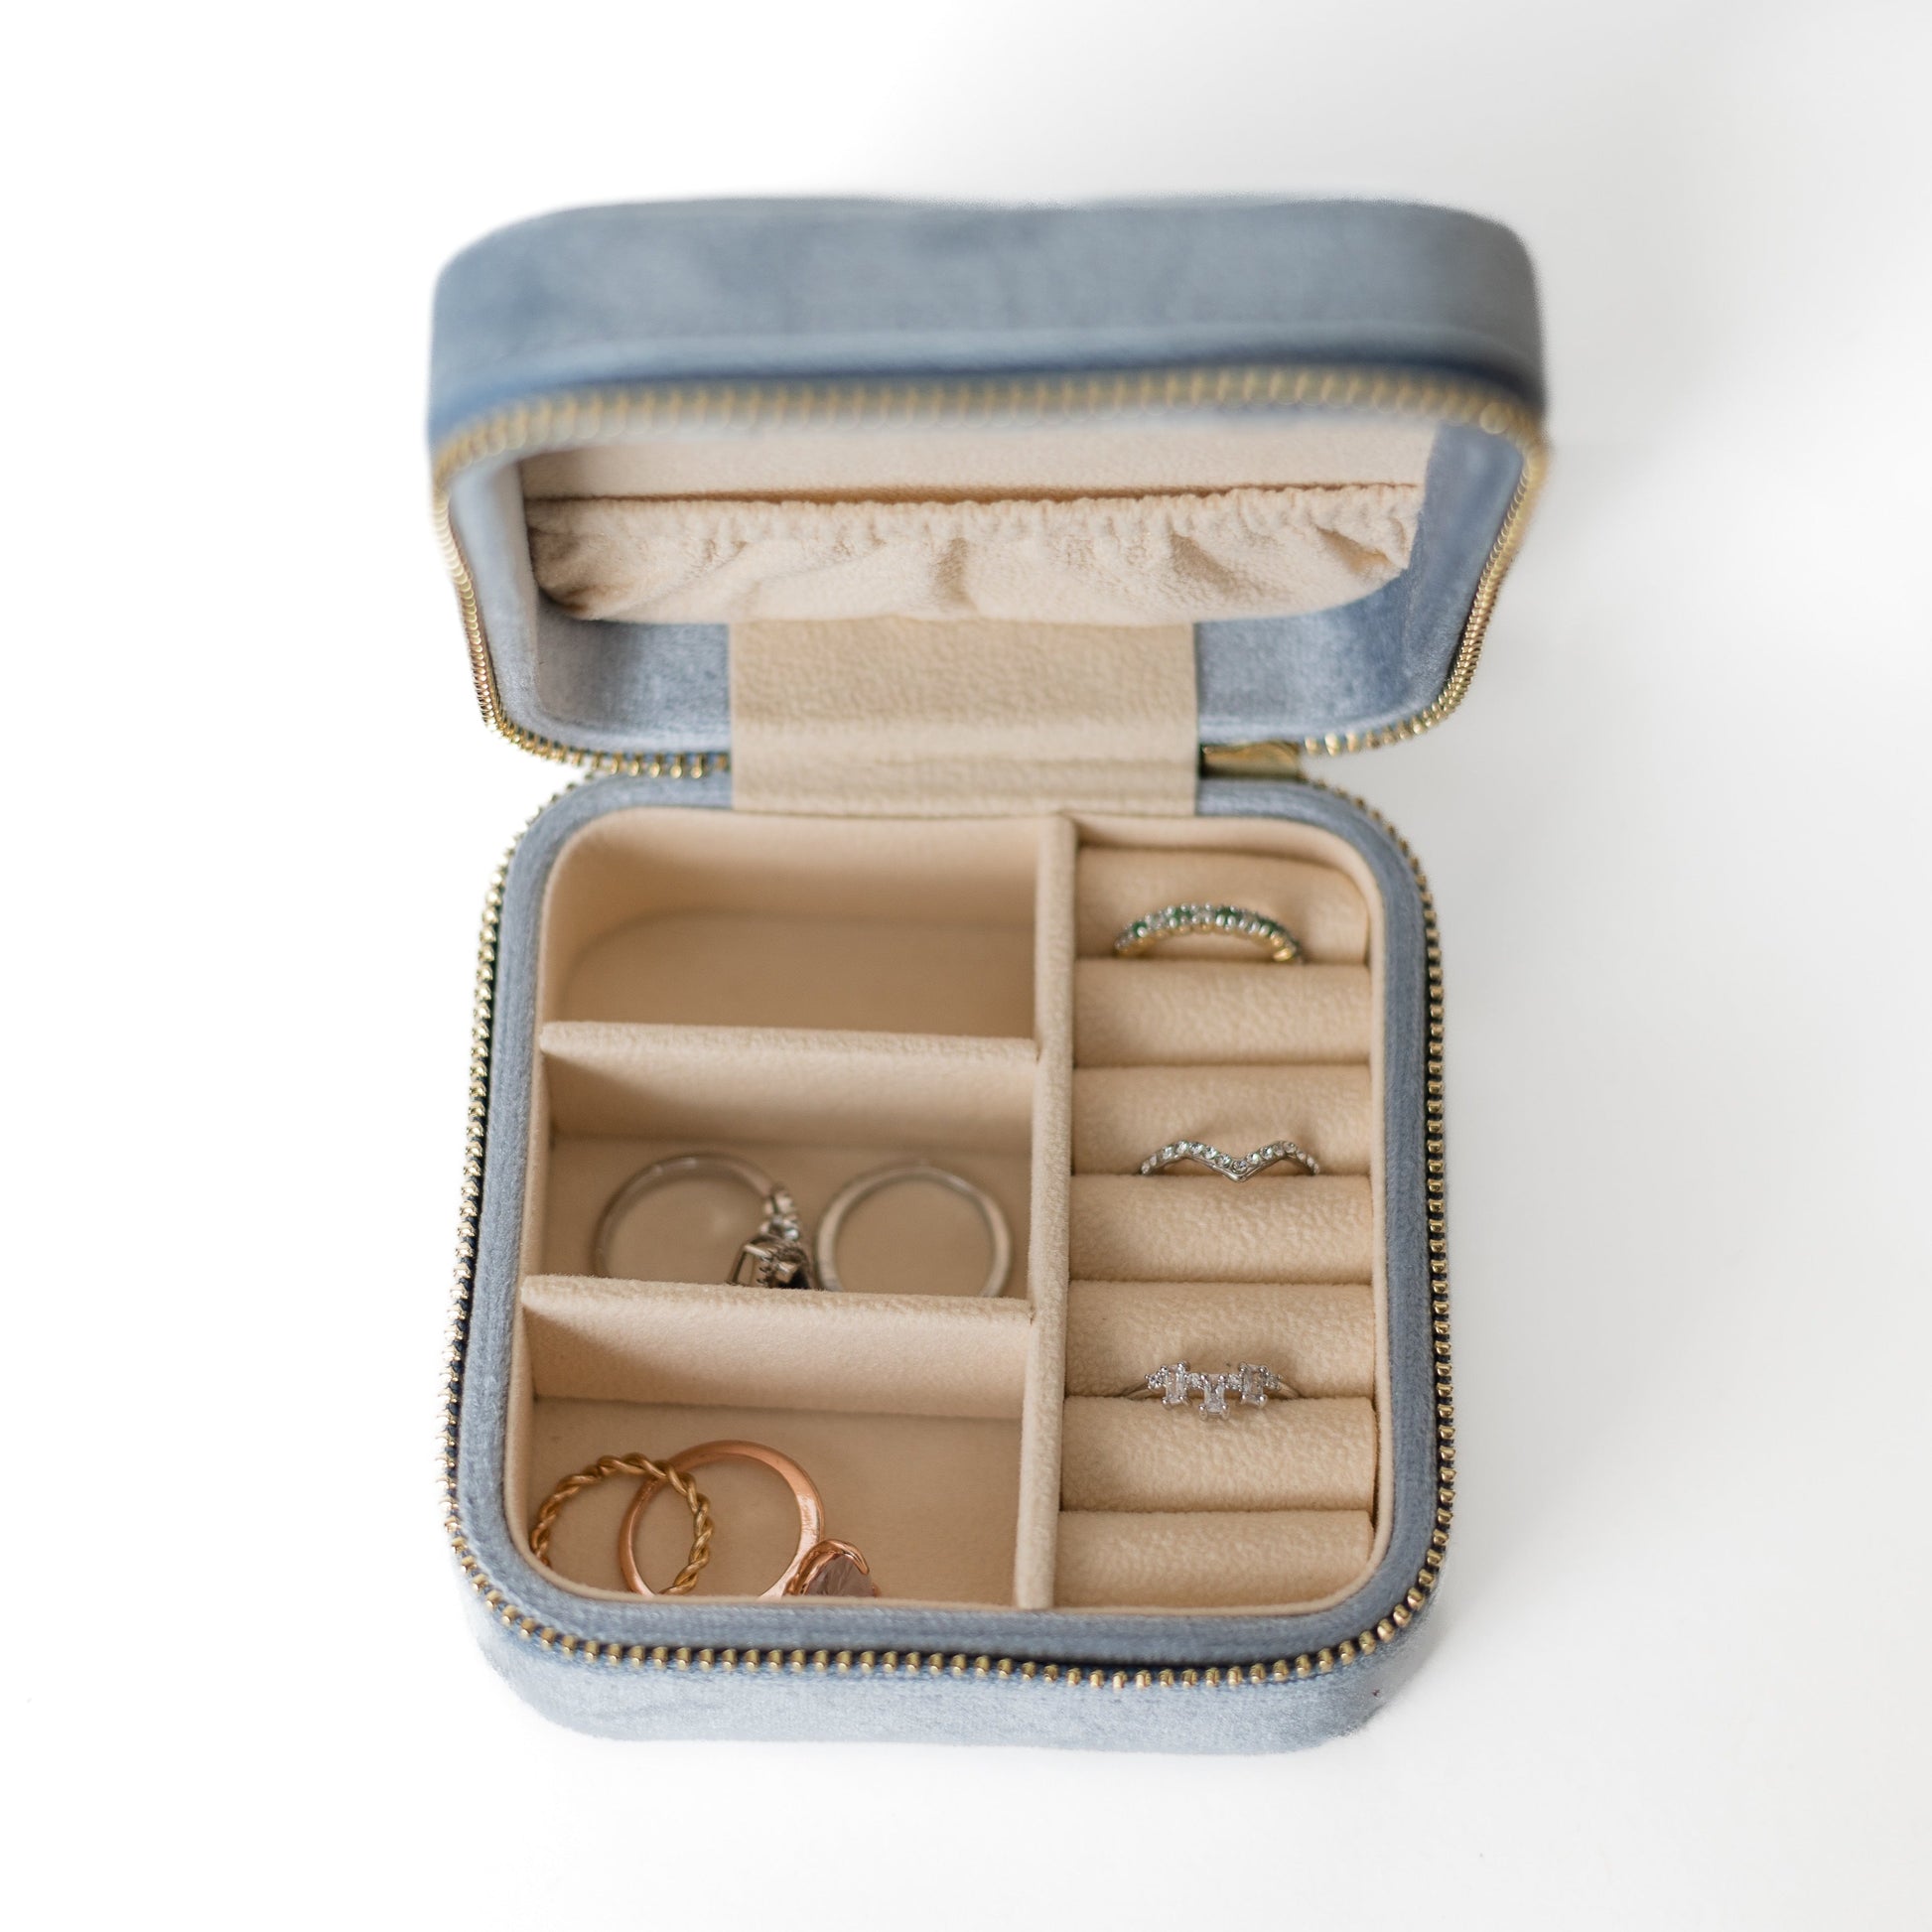 The inside of a powder blue jewelry case. There are three storage sections and seven ring slots on the bottom portion of the case. On the top half, there are three hooks for chains or necklaces and well as a pouch to tuck them in.